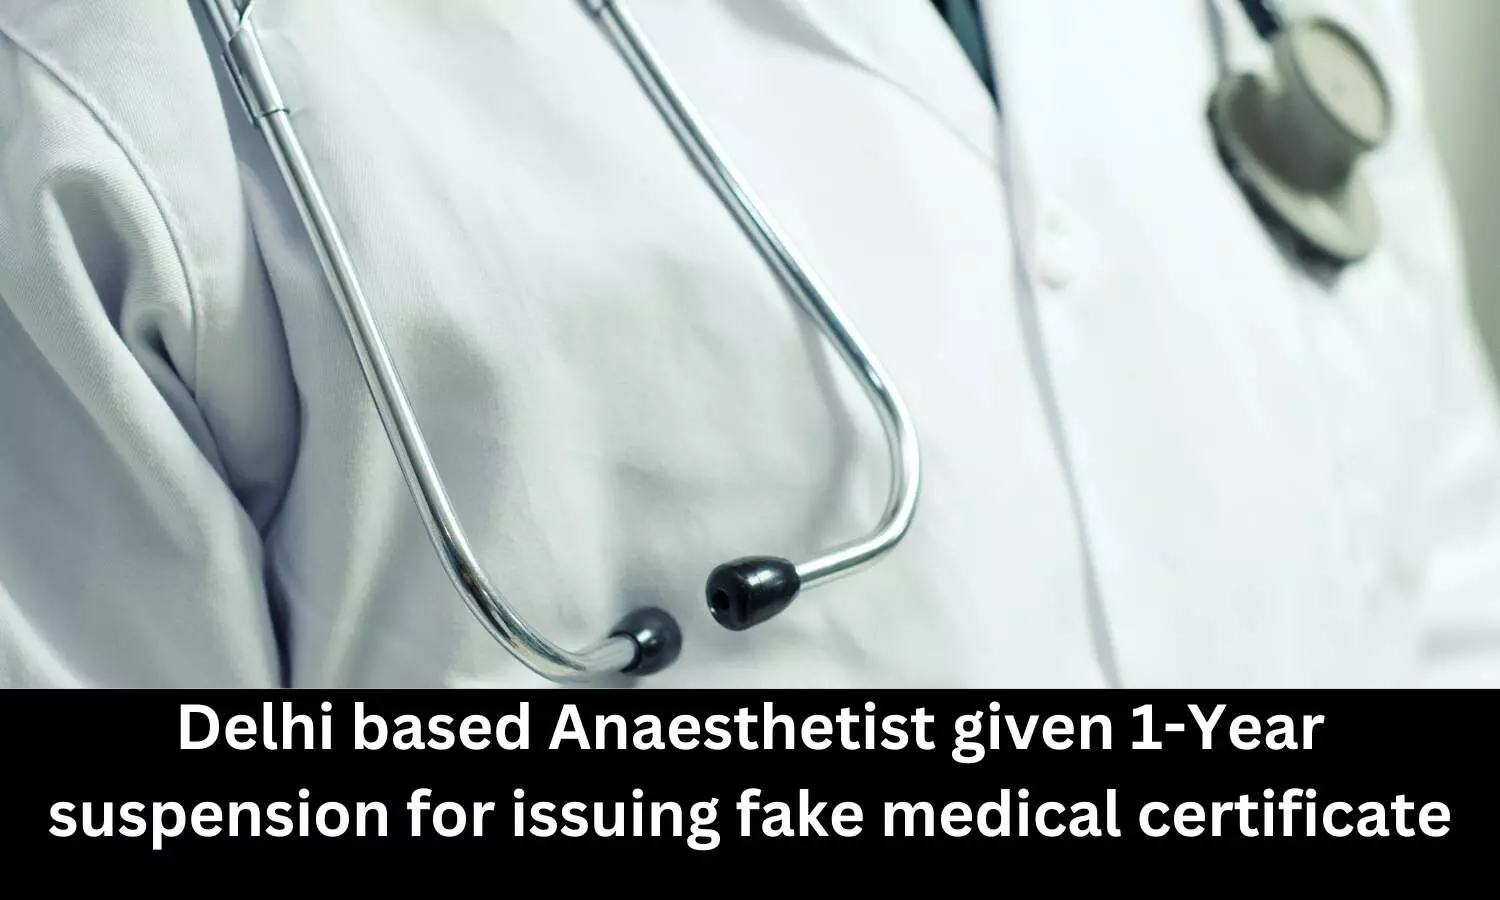 Delhi Medical Council suspends Anaesthetist for issuing fake medical certificates